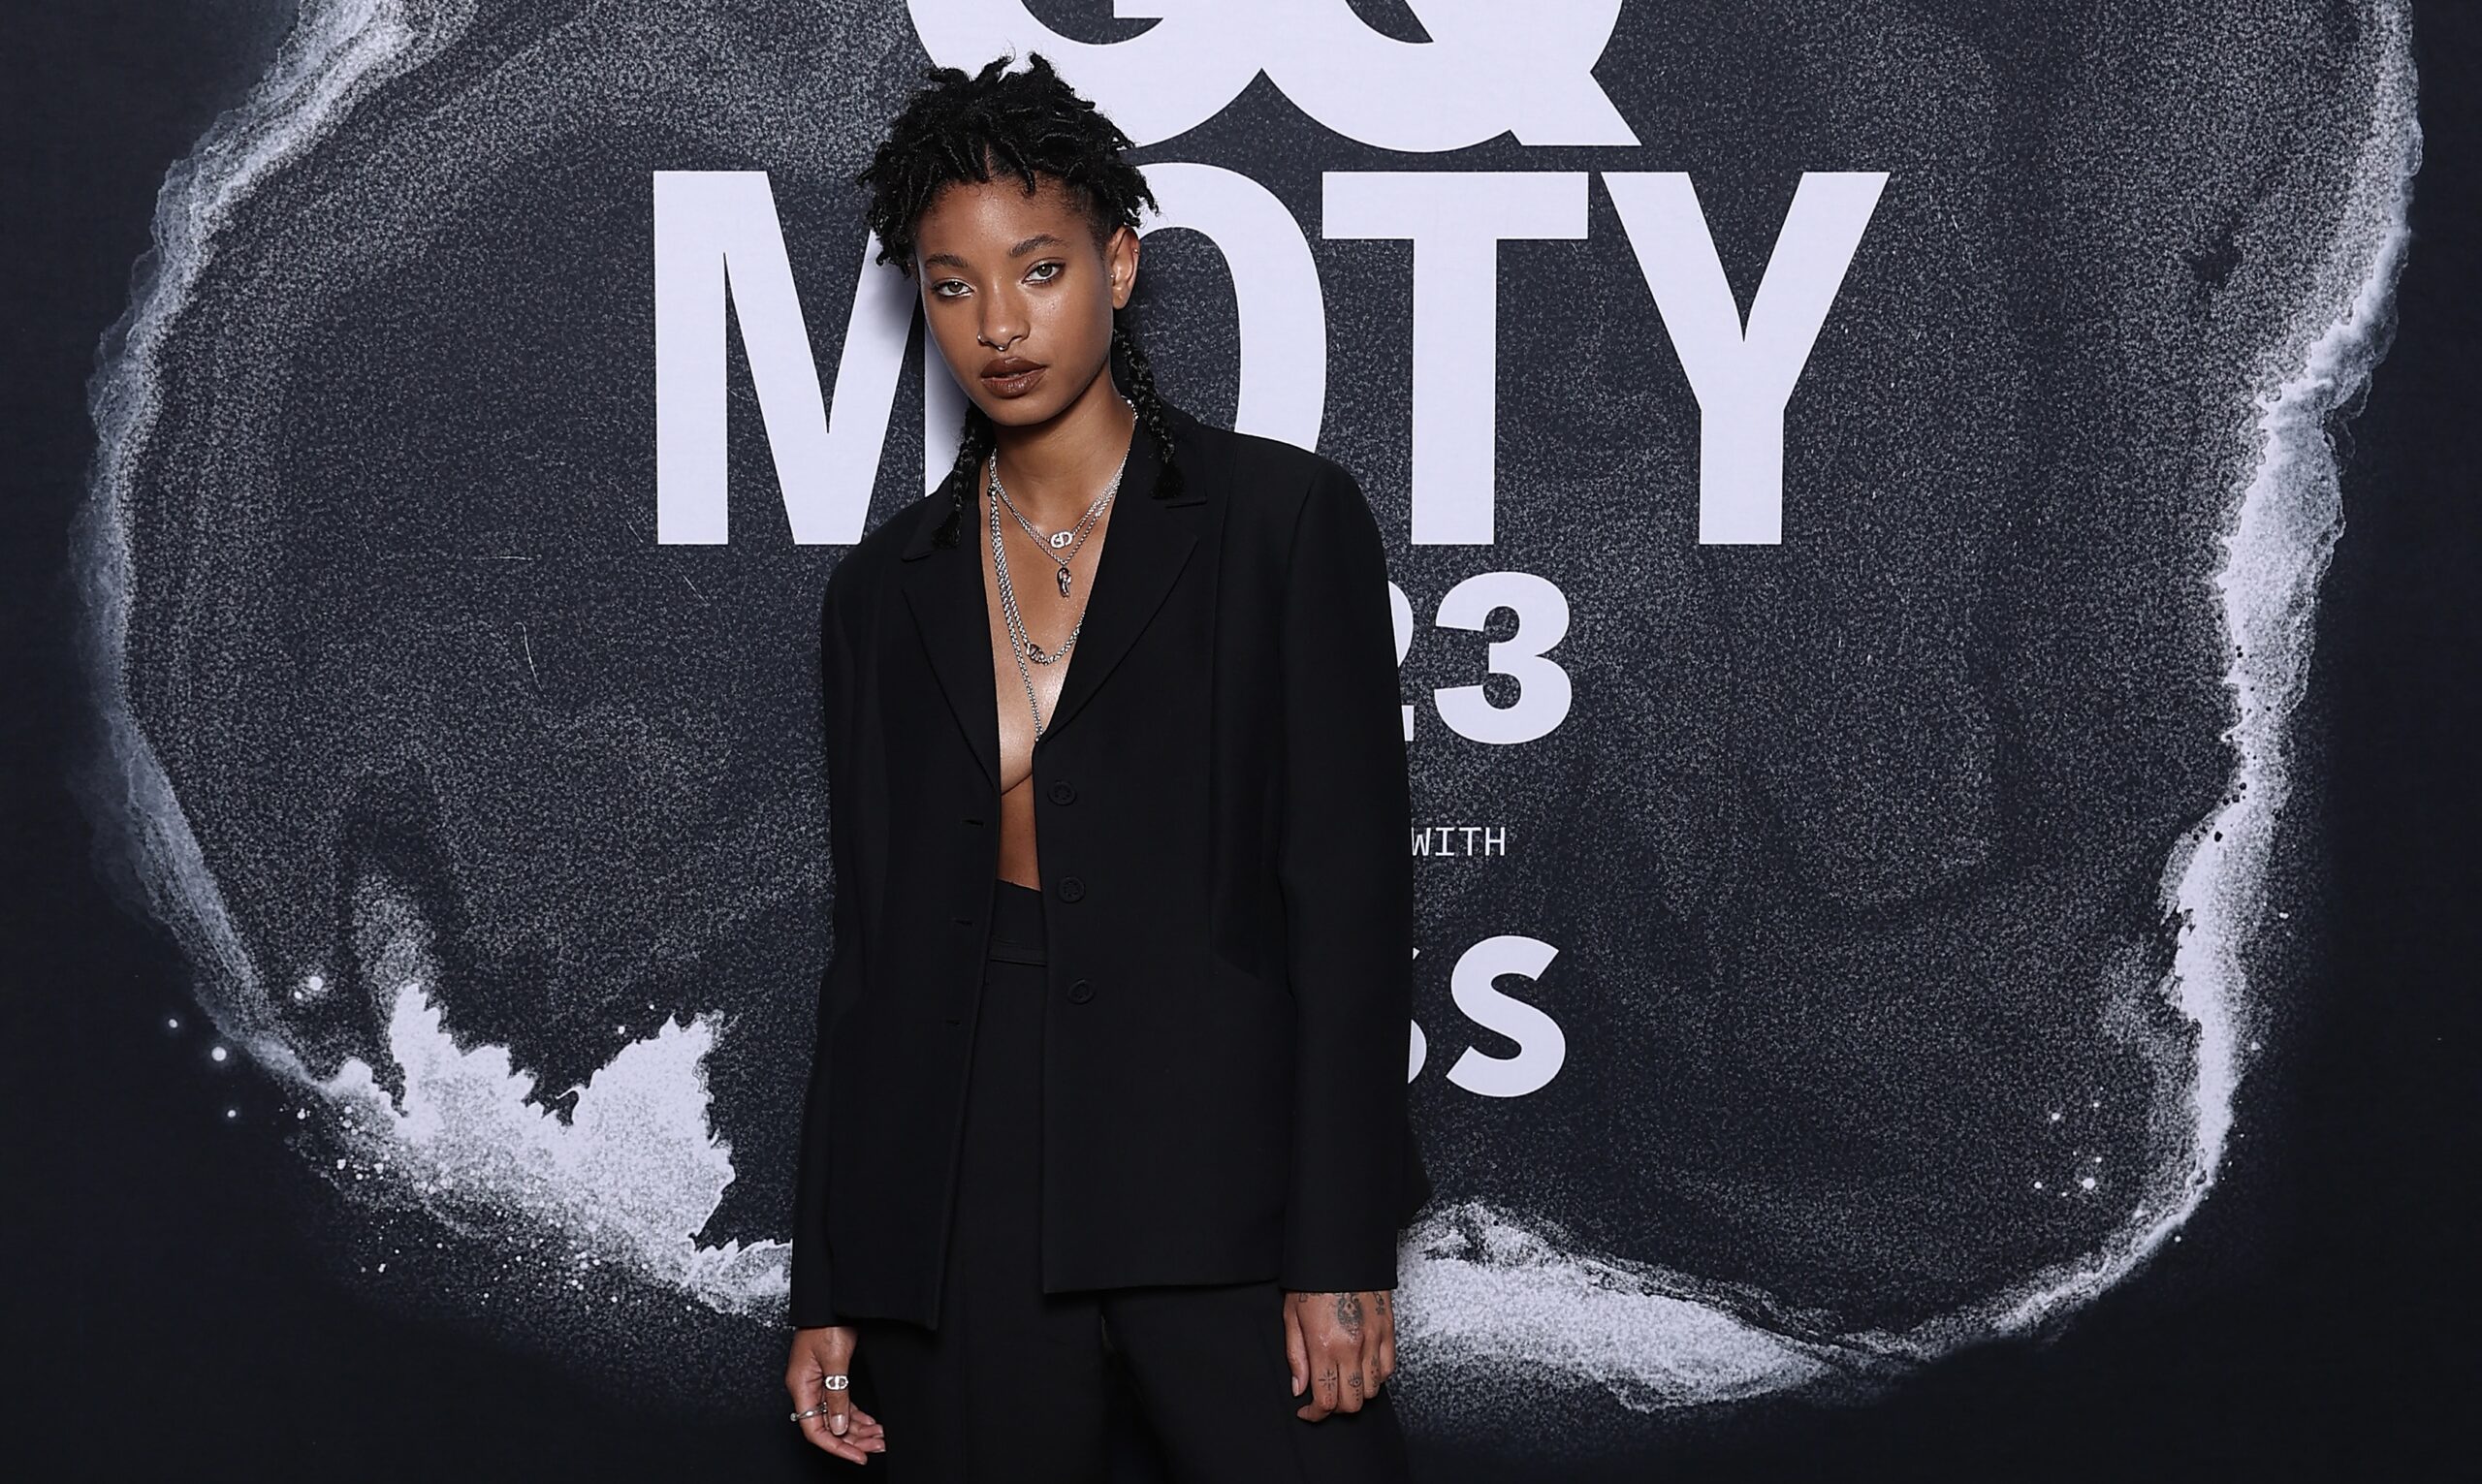 Willow Smith at the GQ Australia Men Of The Year Awards in a tailored black suit, exemplifying androgynous style on the red carpet in Sydney, Australia.